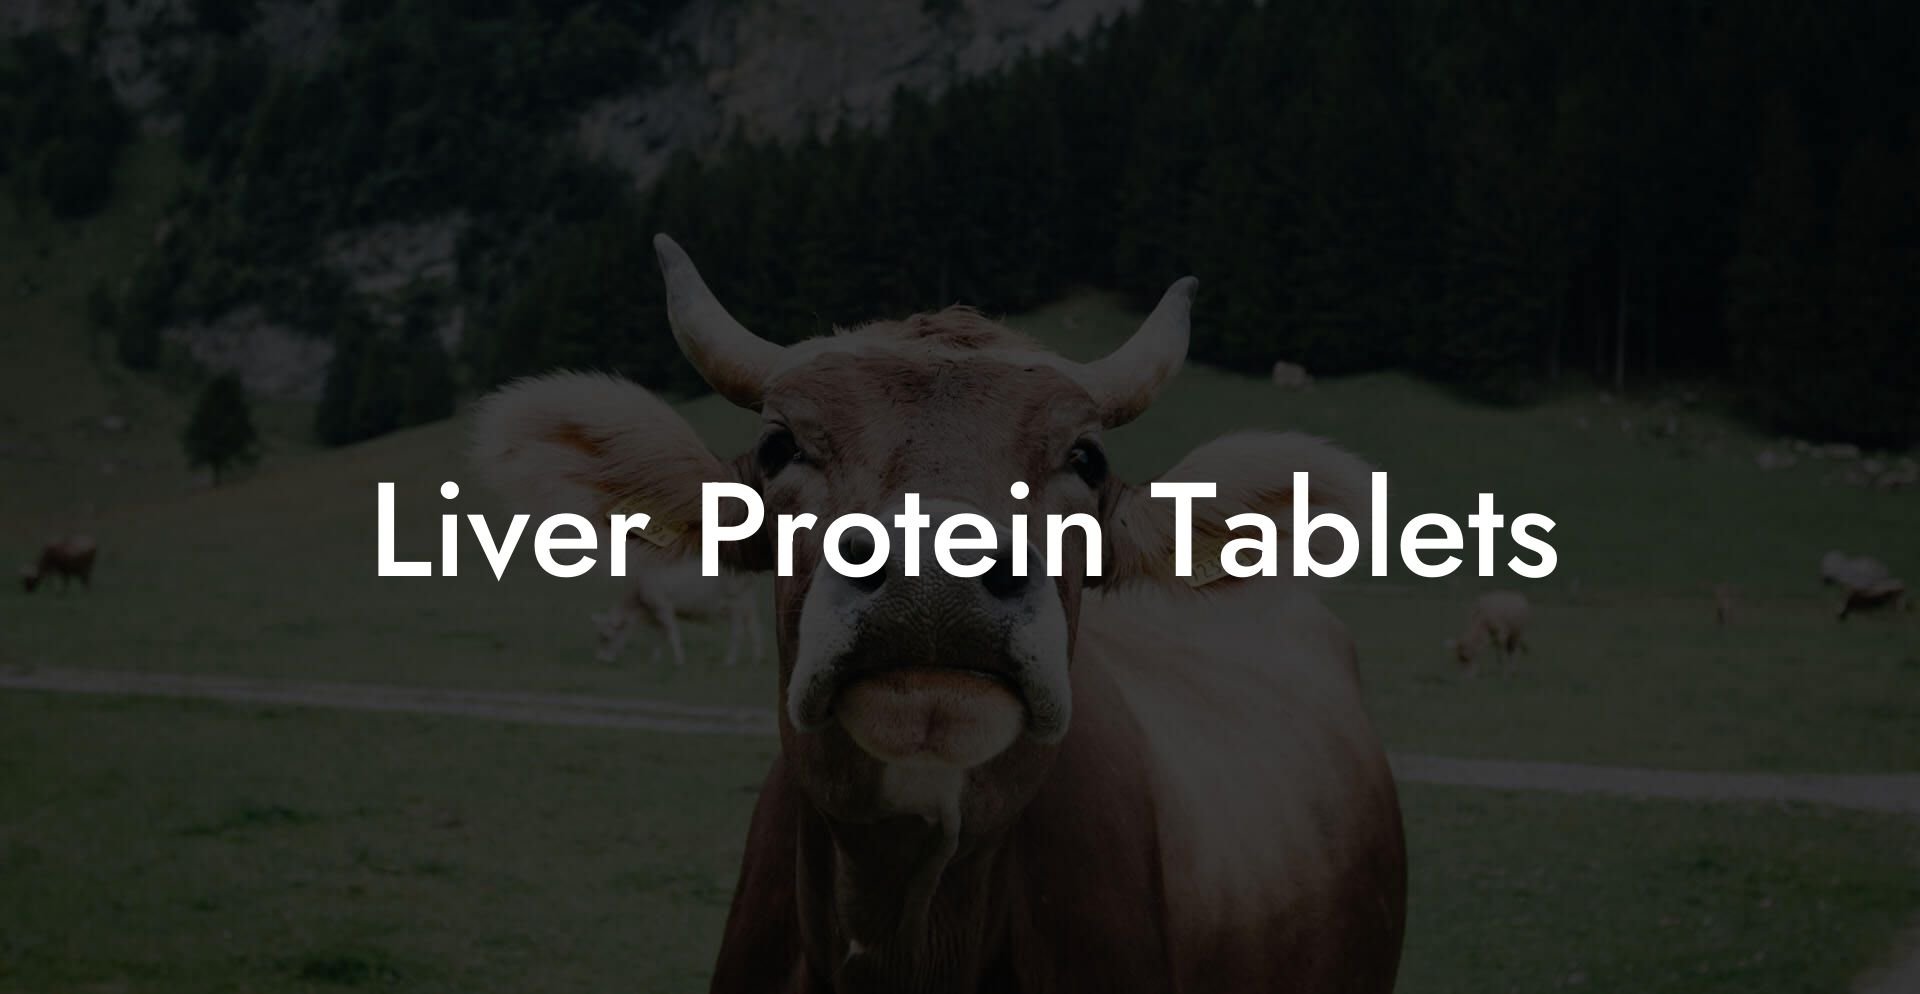 Liver Protein Tablets